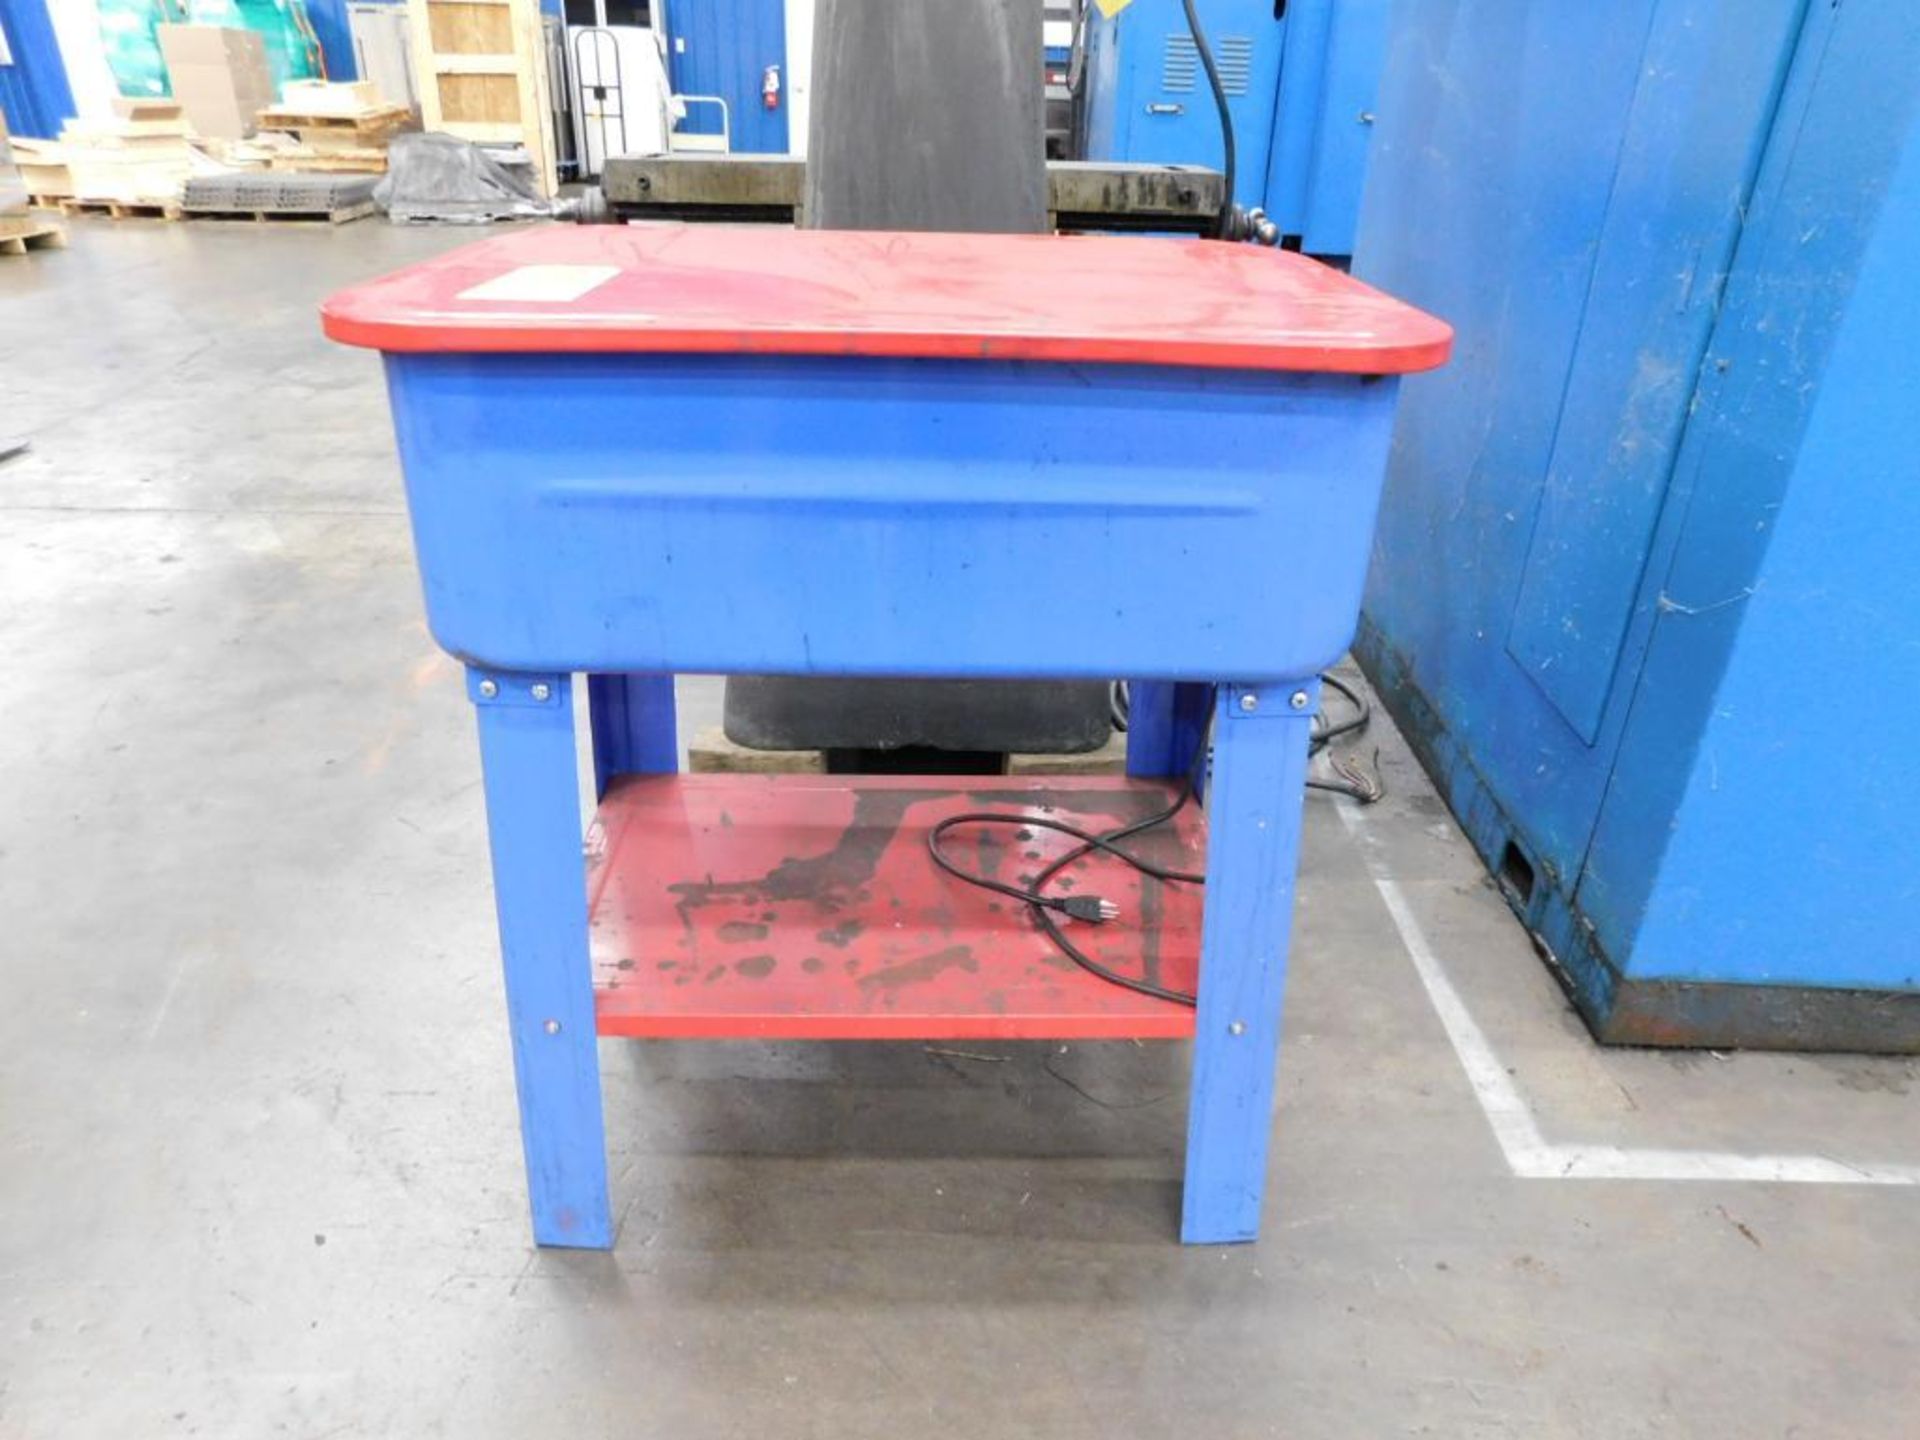 Central Machinery 20-Gallon Parts Washer w/Pump, 120 Volts, 5.25 GPM - Image 2 of 5